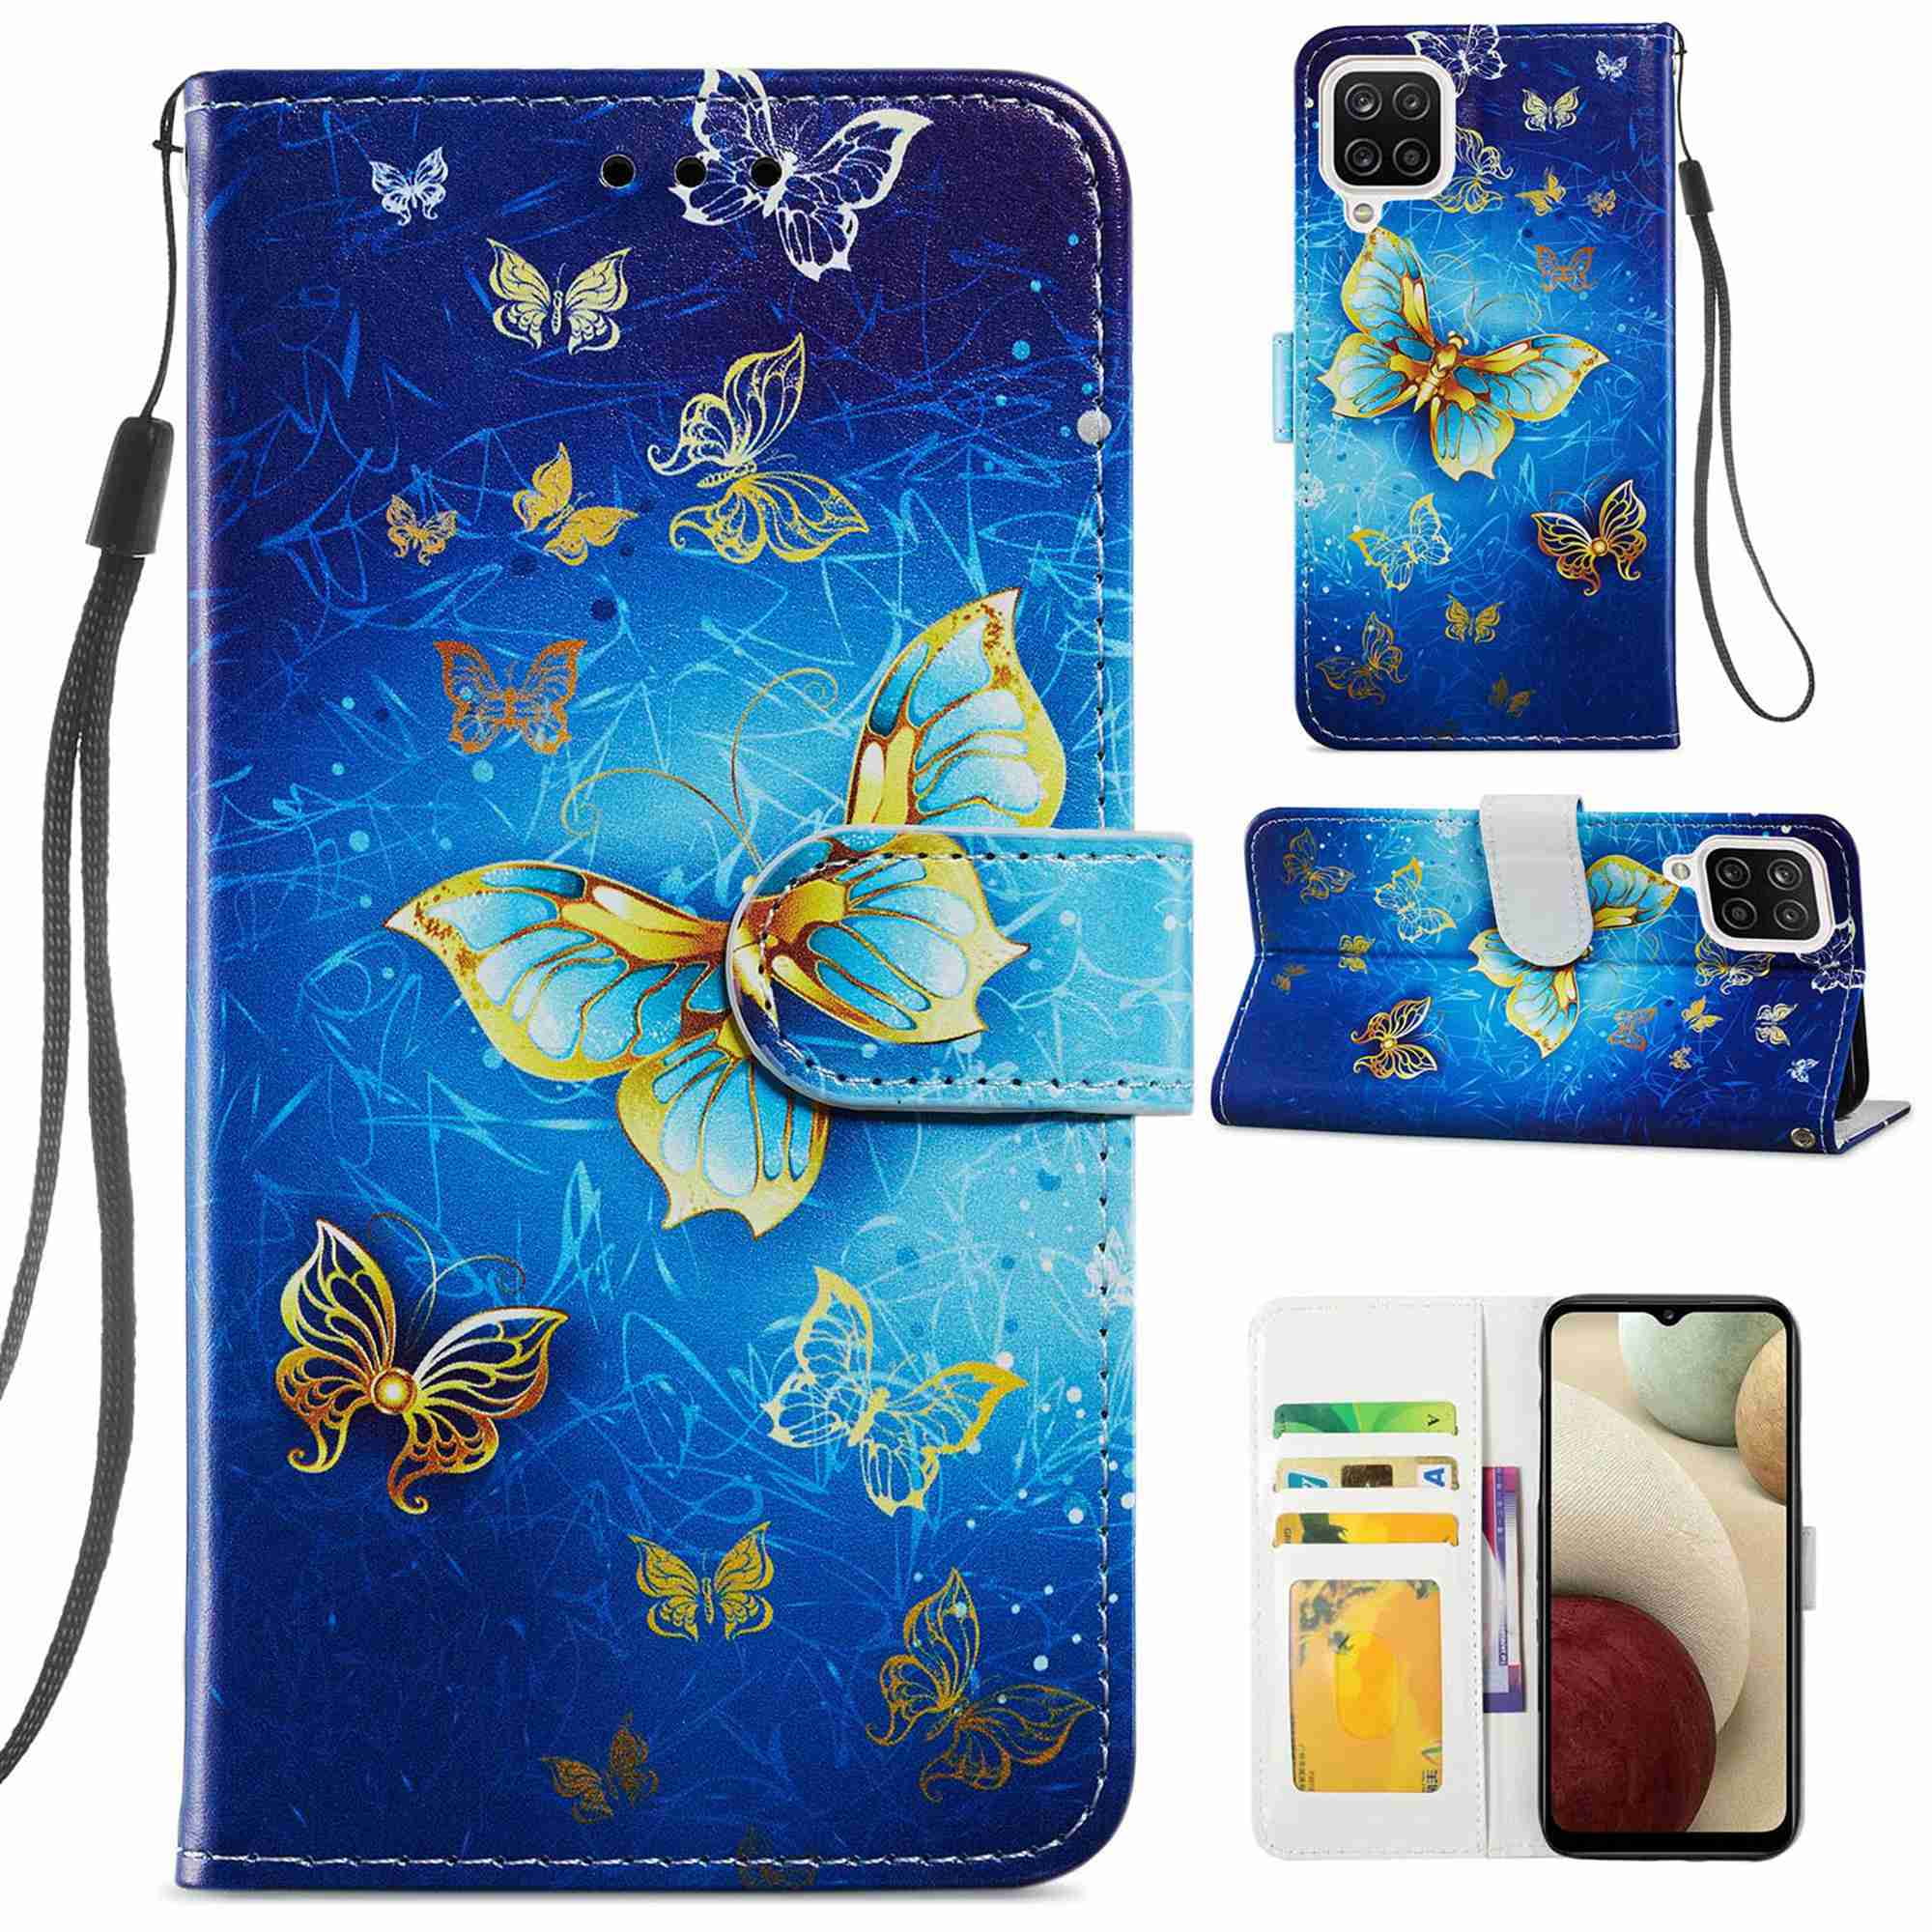 Bling Clear Crystal Diamond PU Leather Flip Notebook Wallet Case Embossed Buterfly Floral with Kickstand Card Holder Slot Protective Skin Cover for Samsung Galaxy A6 Blue Samsung Galaxy A6 Case